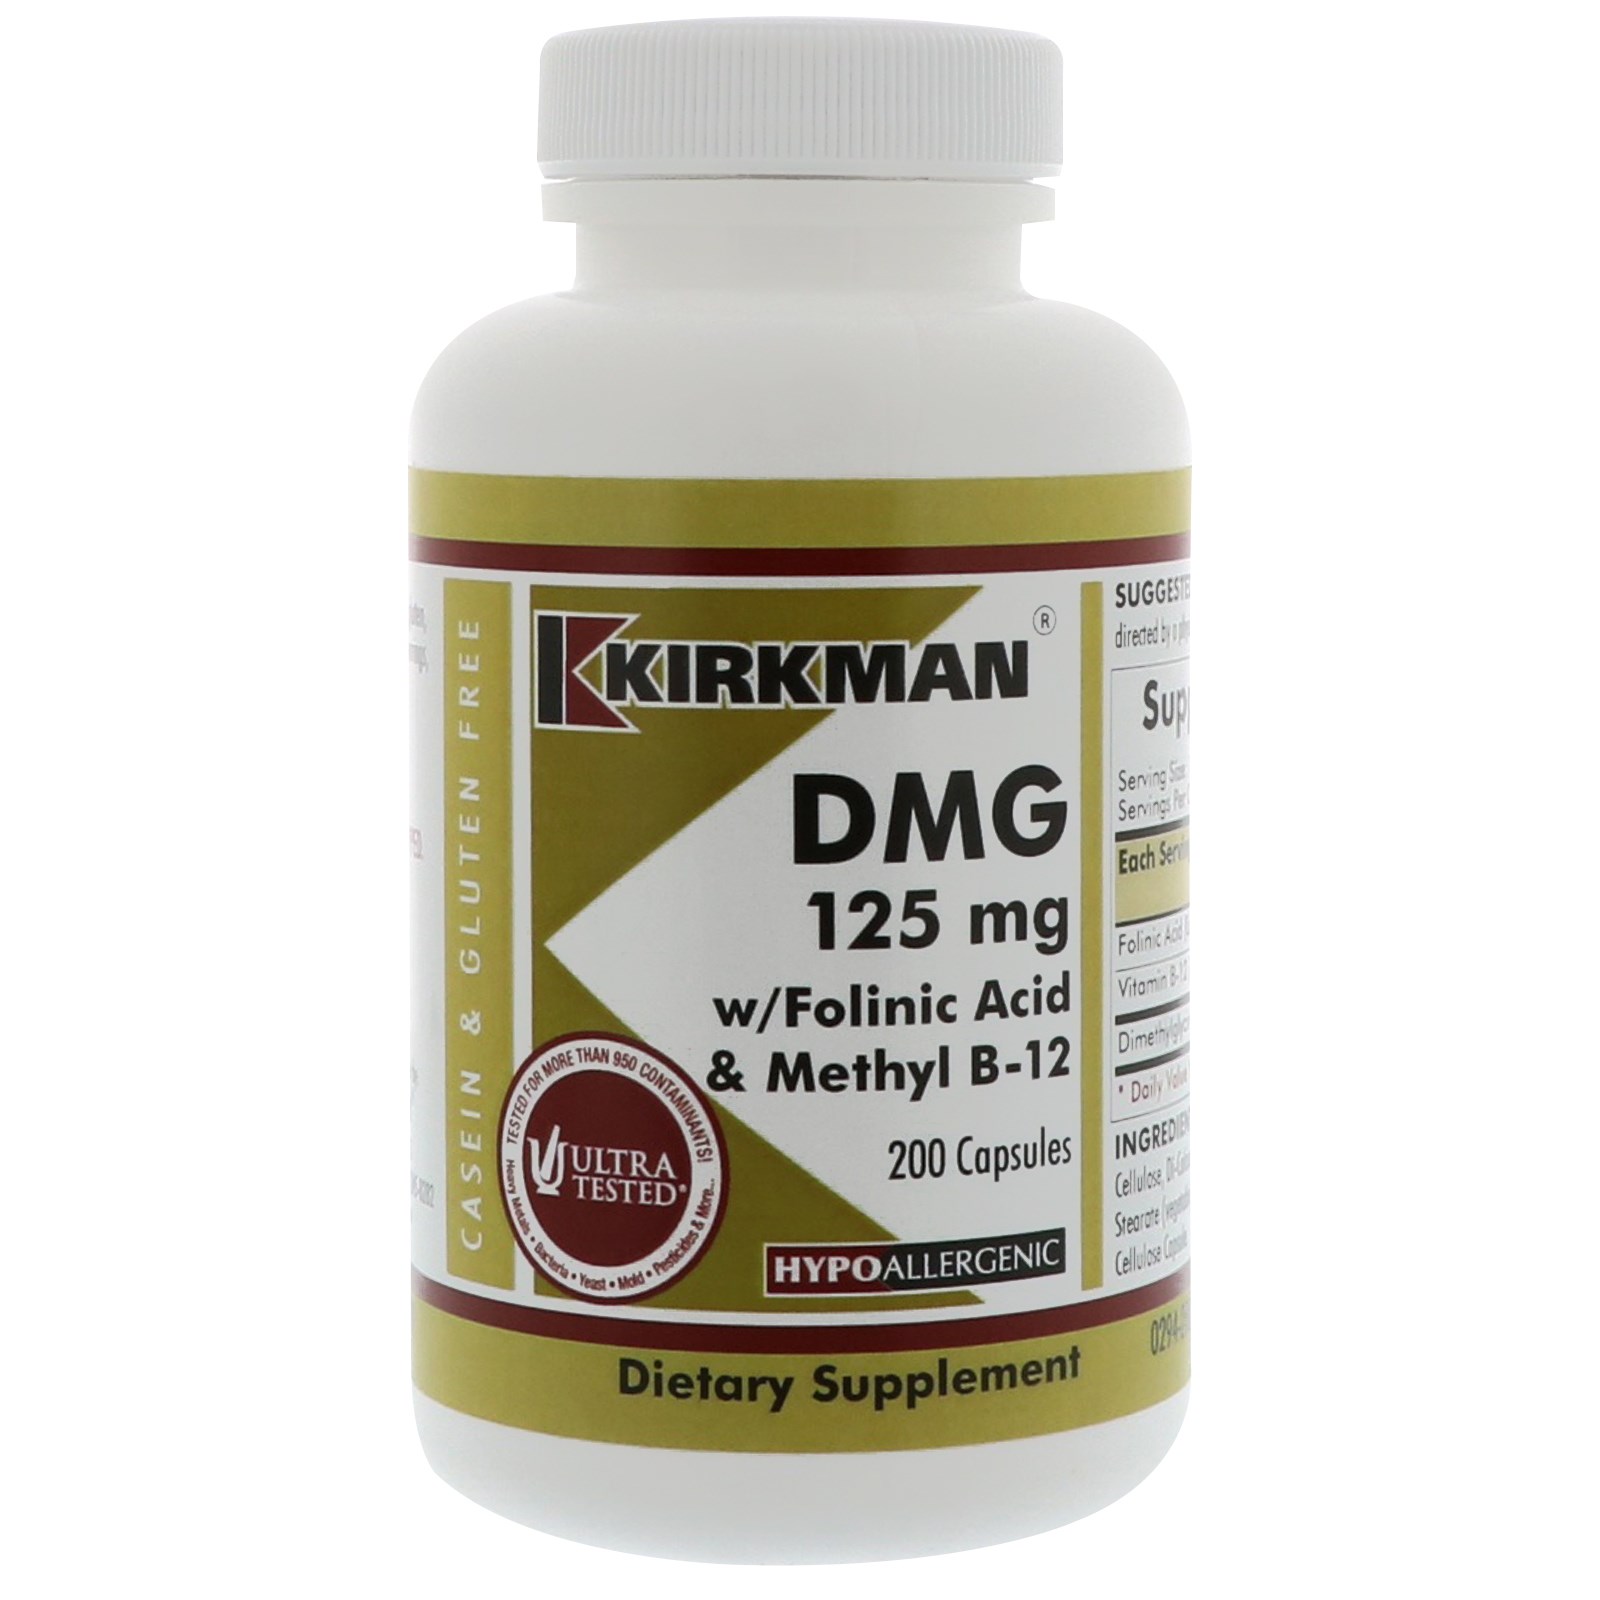 Dmg or tmg 125 mg for sale